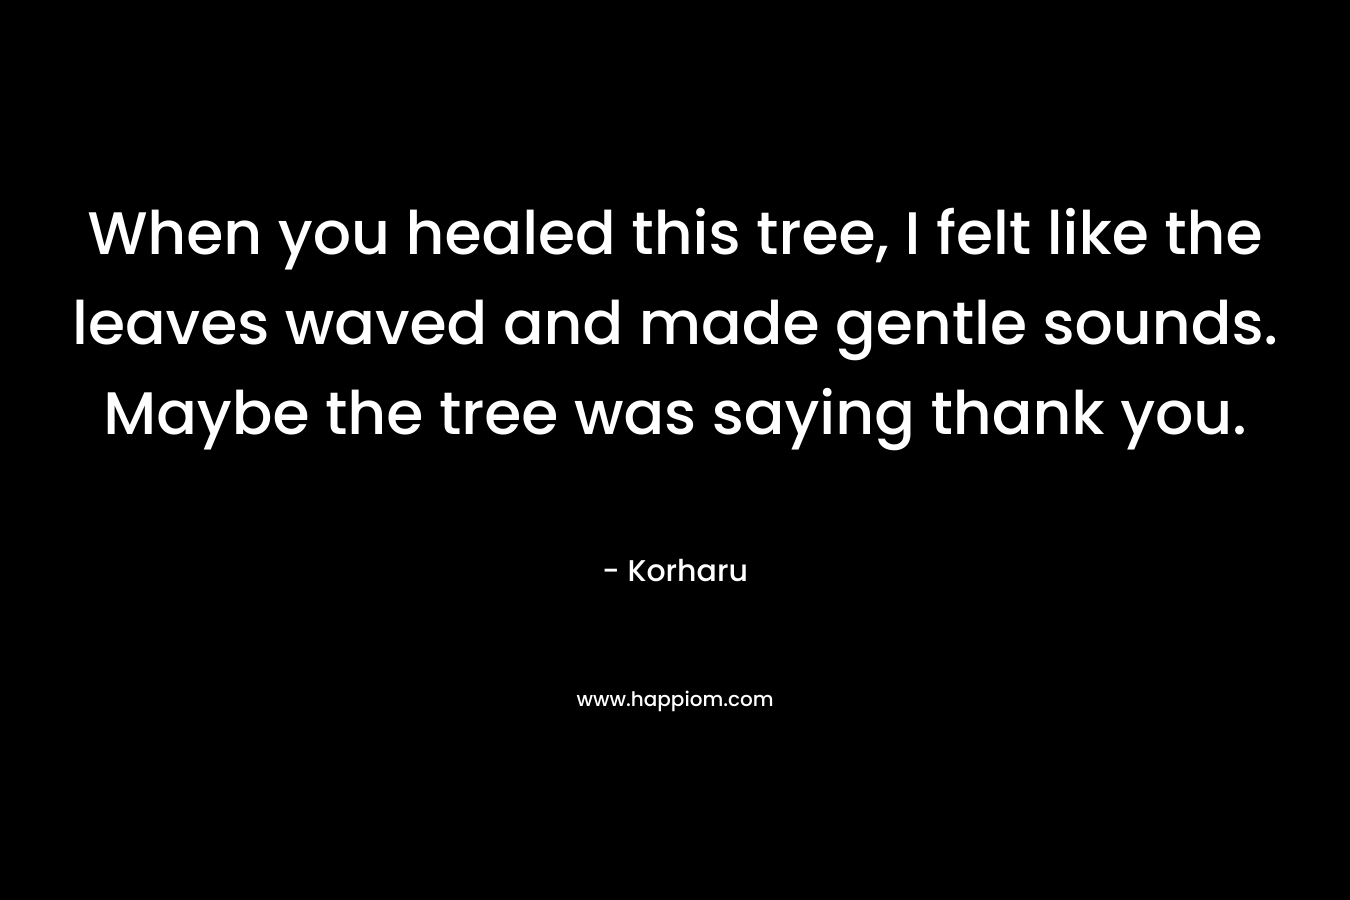 When you healed this tree, I felt like the leaves waved and made gentle sounds. Maybe the tree was saying thank you. – Korharu